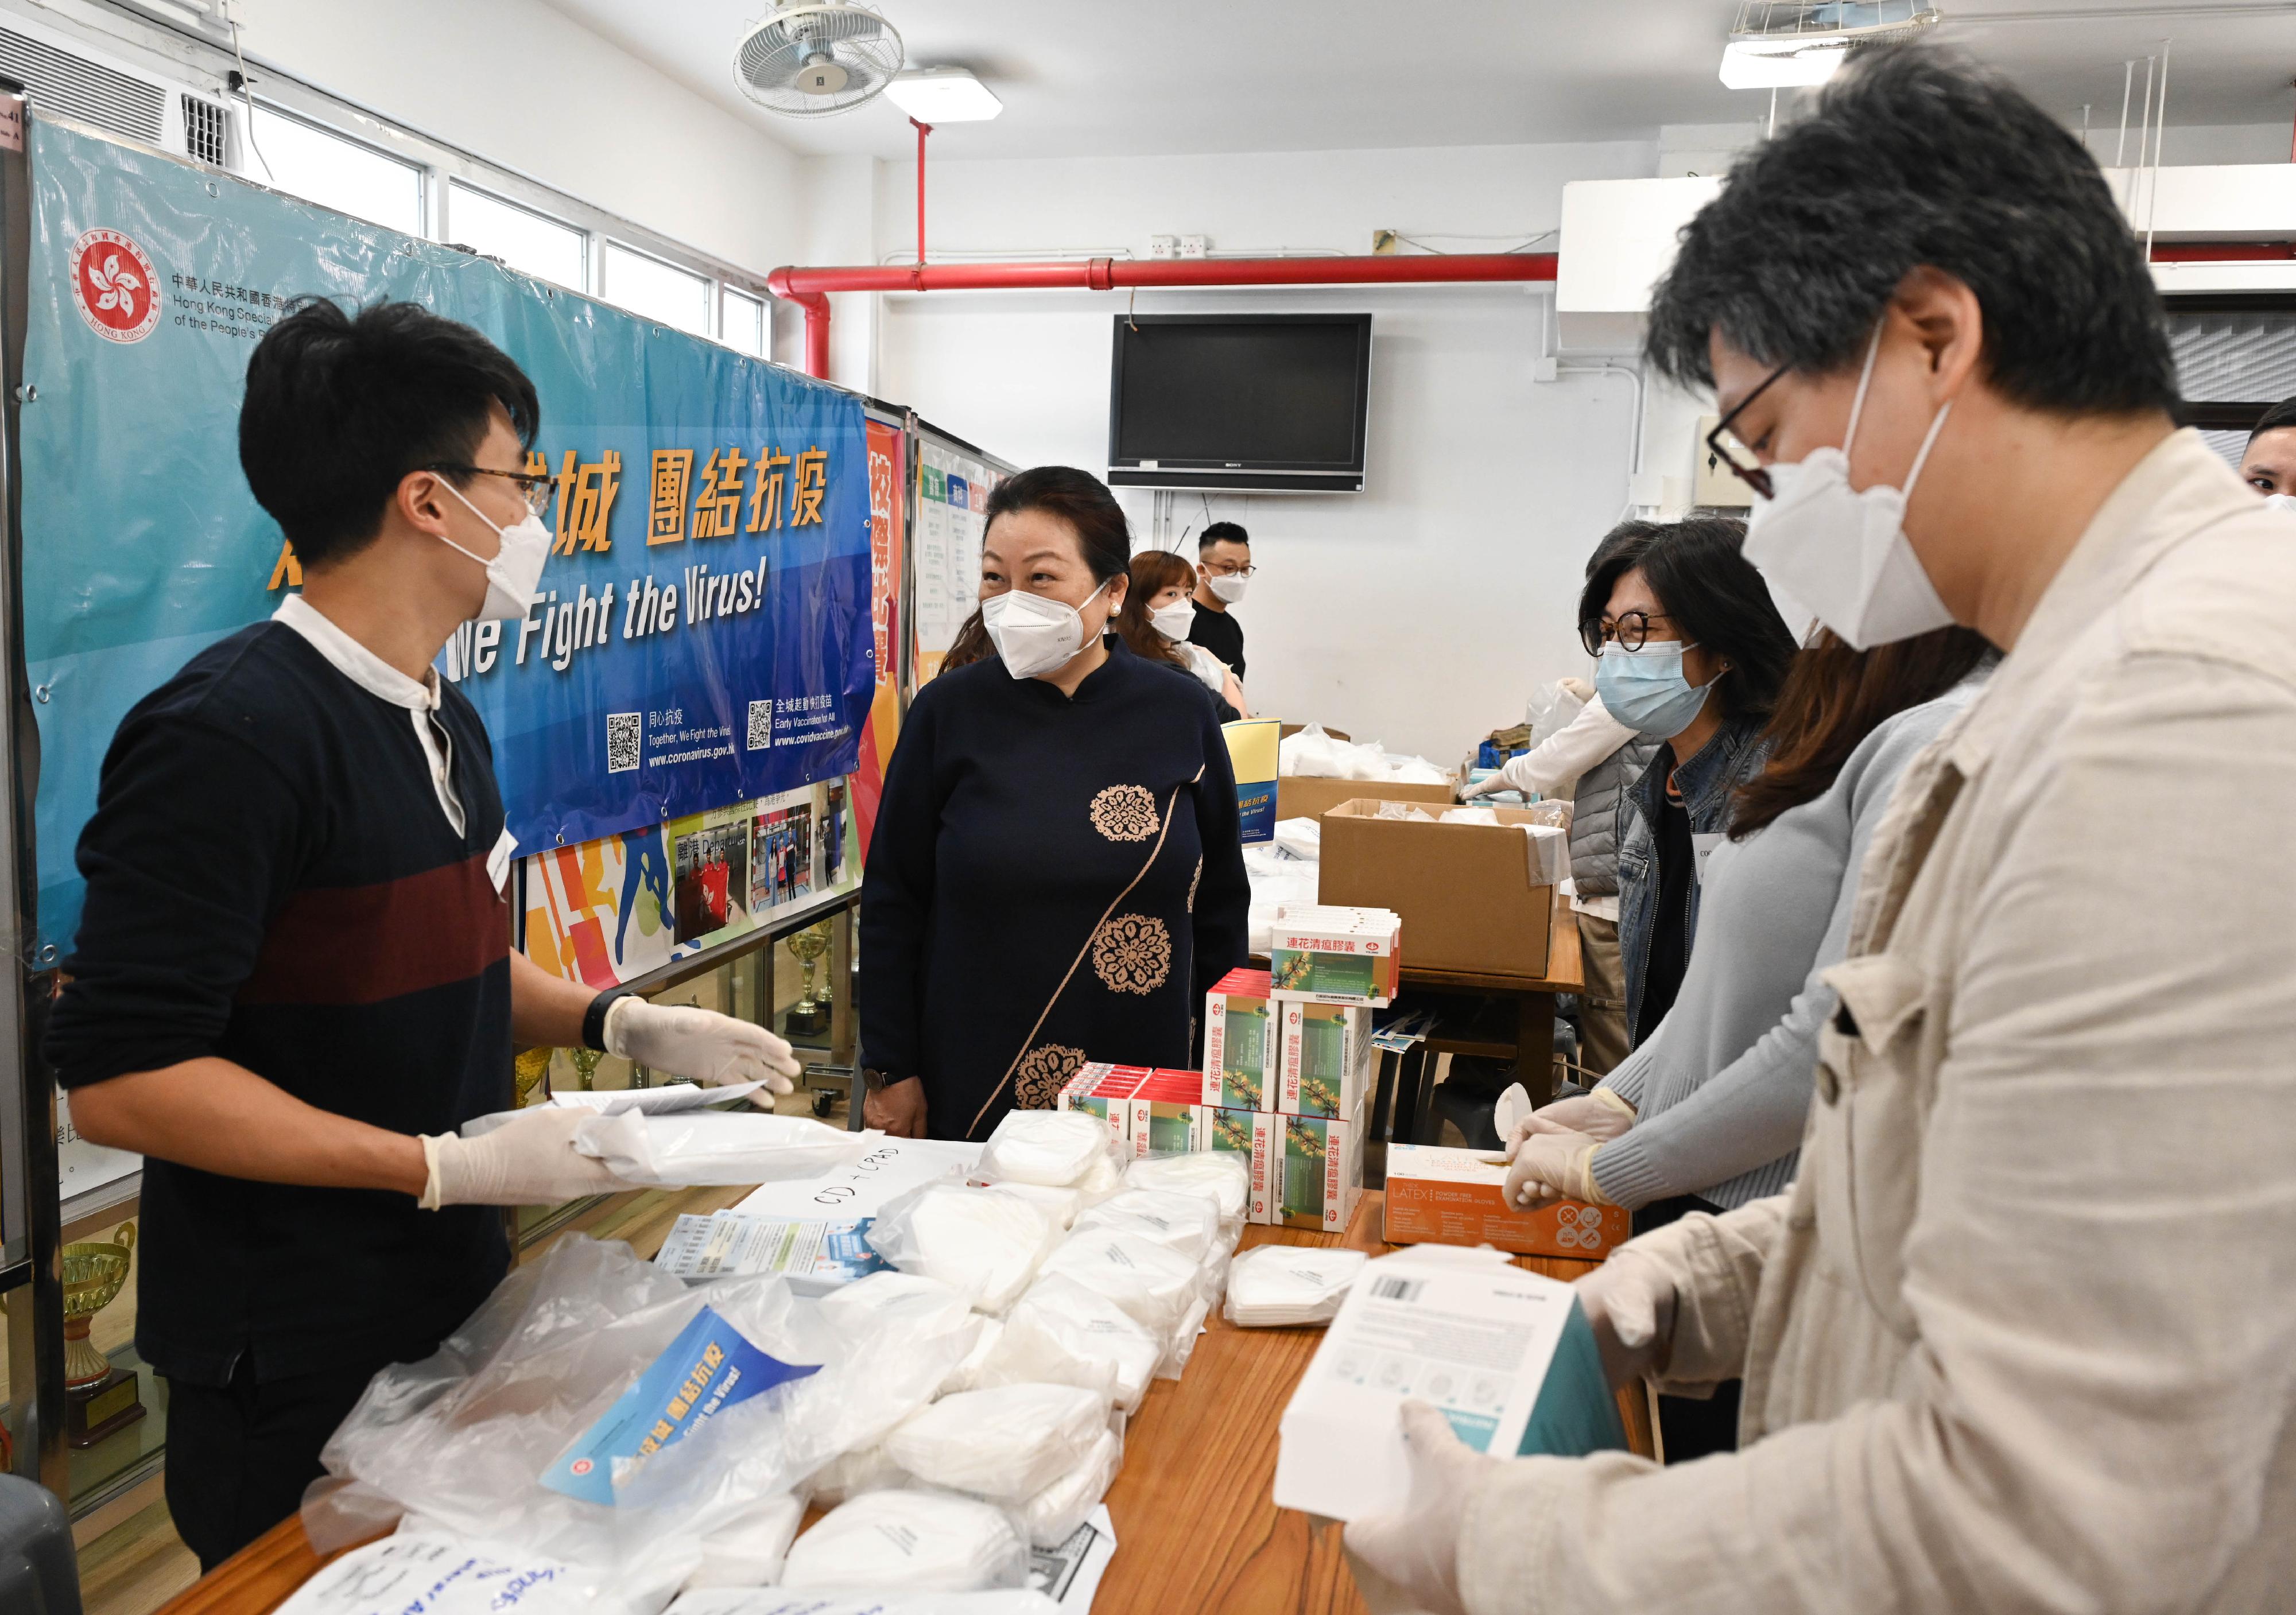 The Hong Kong Special Administrative Region Government is working at full steam on the preparation for packaging and distribution of anti-epidemic service bags. Photo shows the Secretary for Justice, Ms Teresa Cheng, SC (centre), visiting the Department of Justice's colleagues participating in the packaging work at the packaging centre for anti-epidemic service bags at Ho Lap College (sponsored by Sik Sik Yuen) in Wong Tai Sin today (March 30). She extended her gratitude and gave encouragement to all the staff members at the centre.